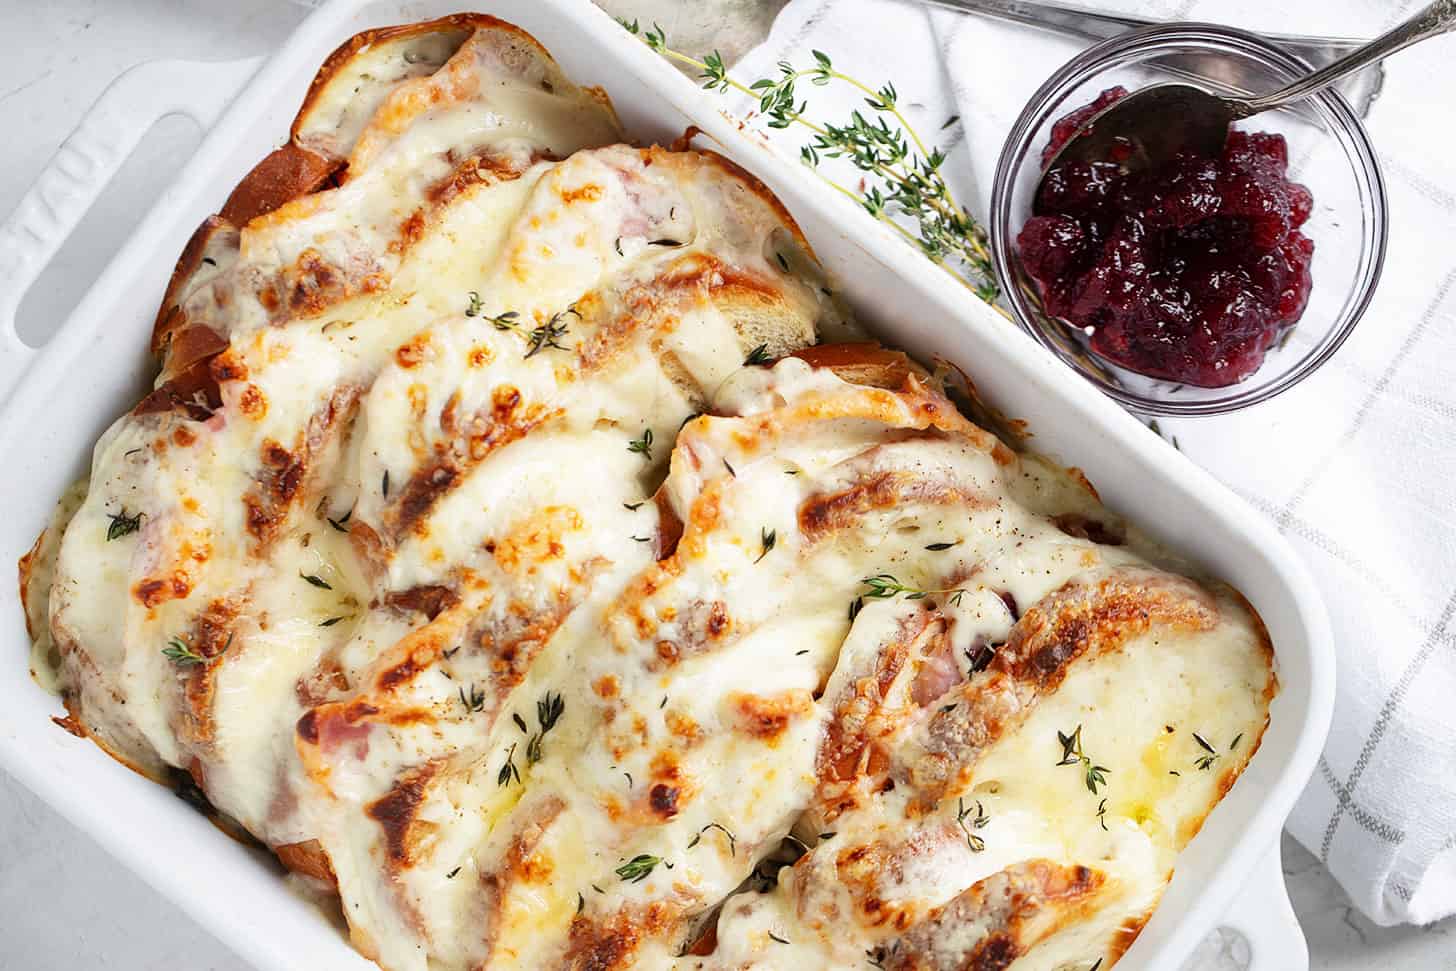 Croque Monsieur casserole in baking dish with cranberry sauce on the side